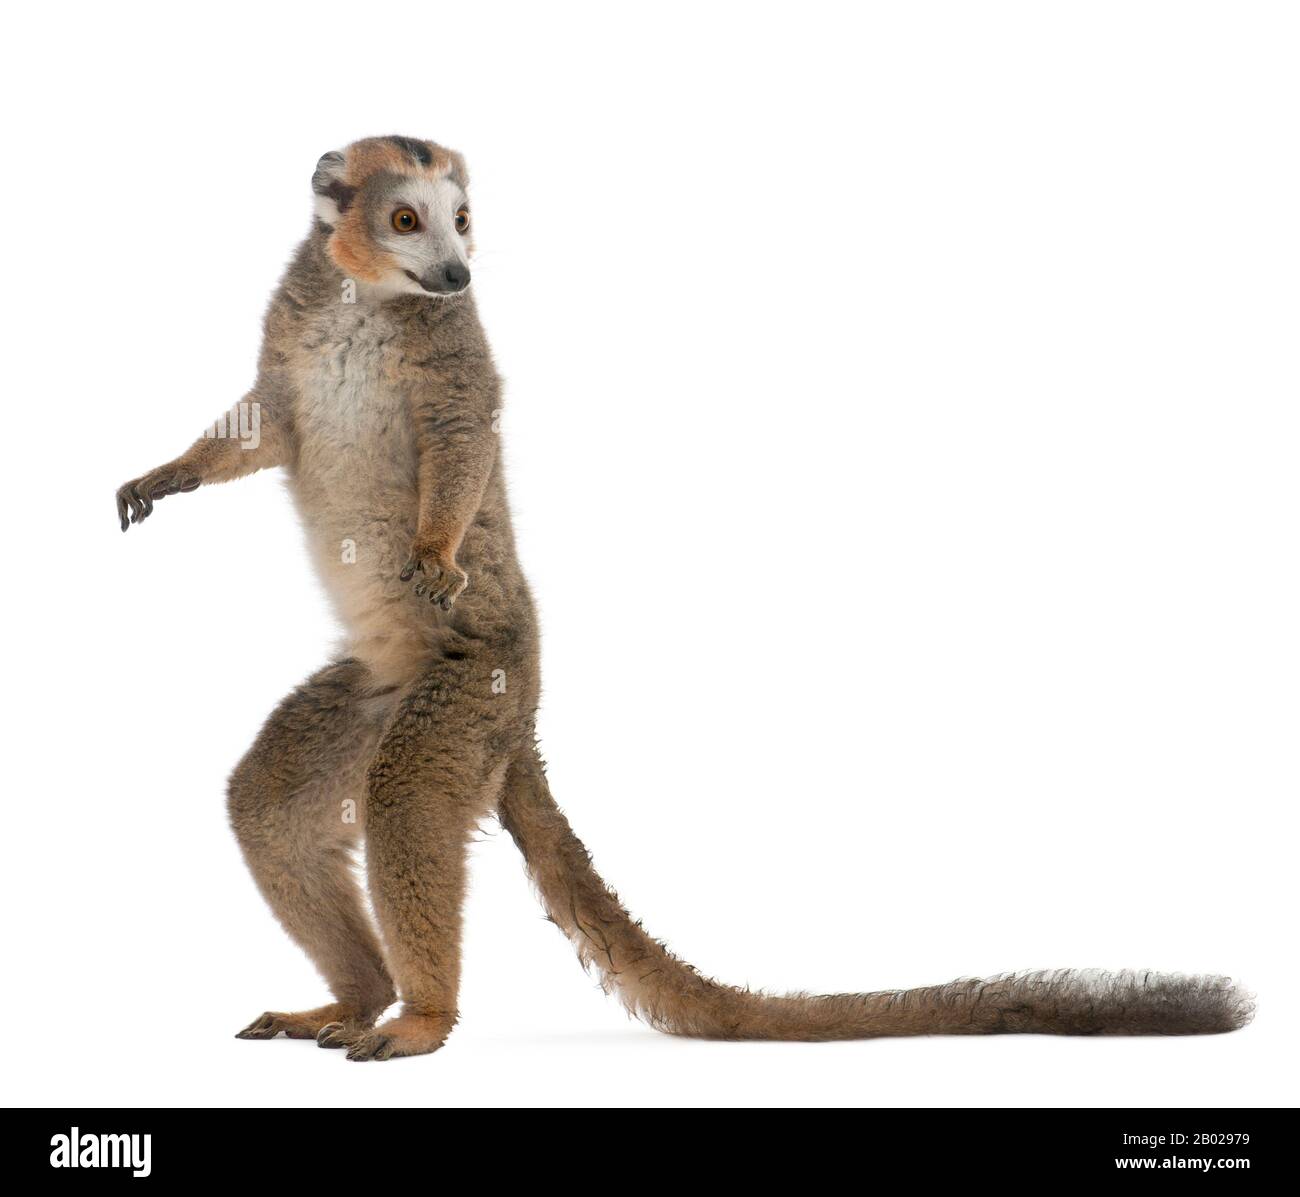 Crowned lemur, Eulemur coronatus, 19 years old, standing in front of white background Stock Photo